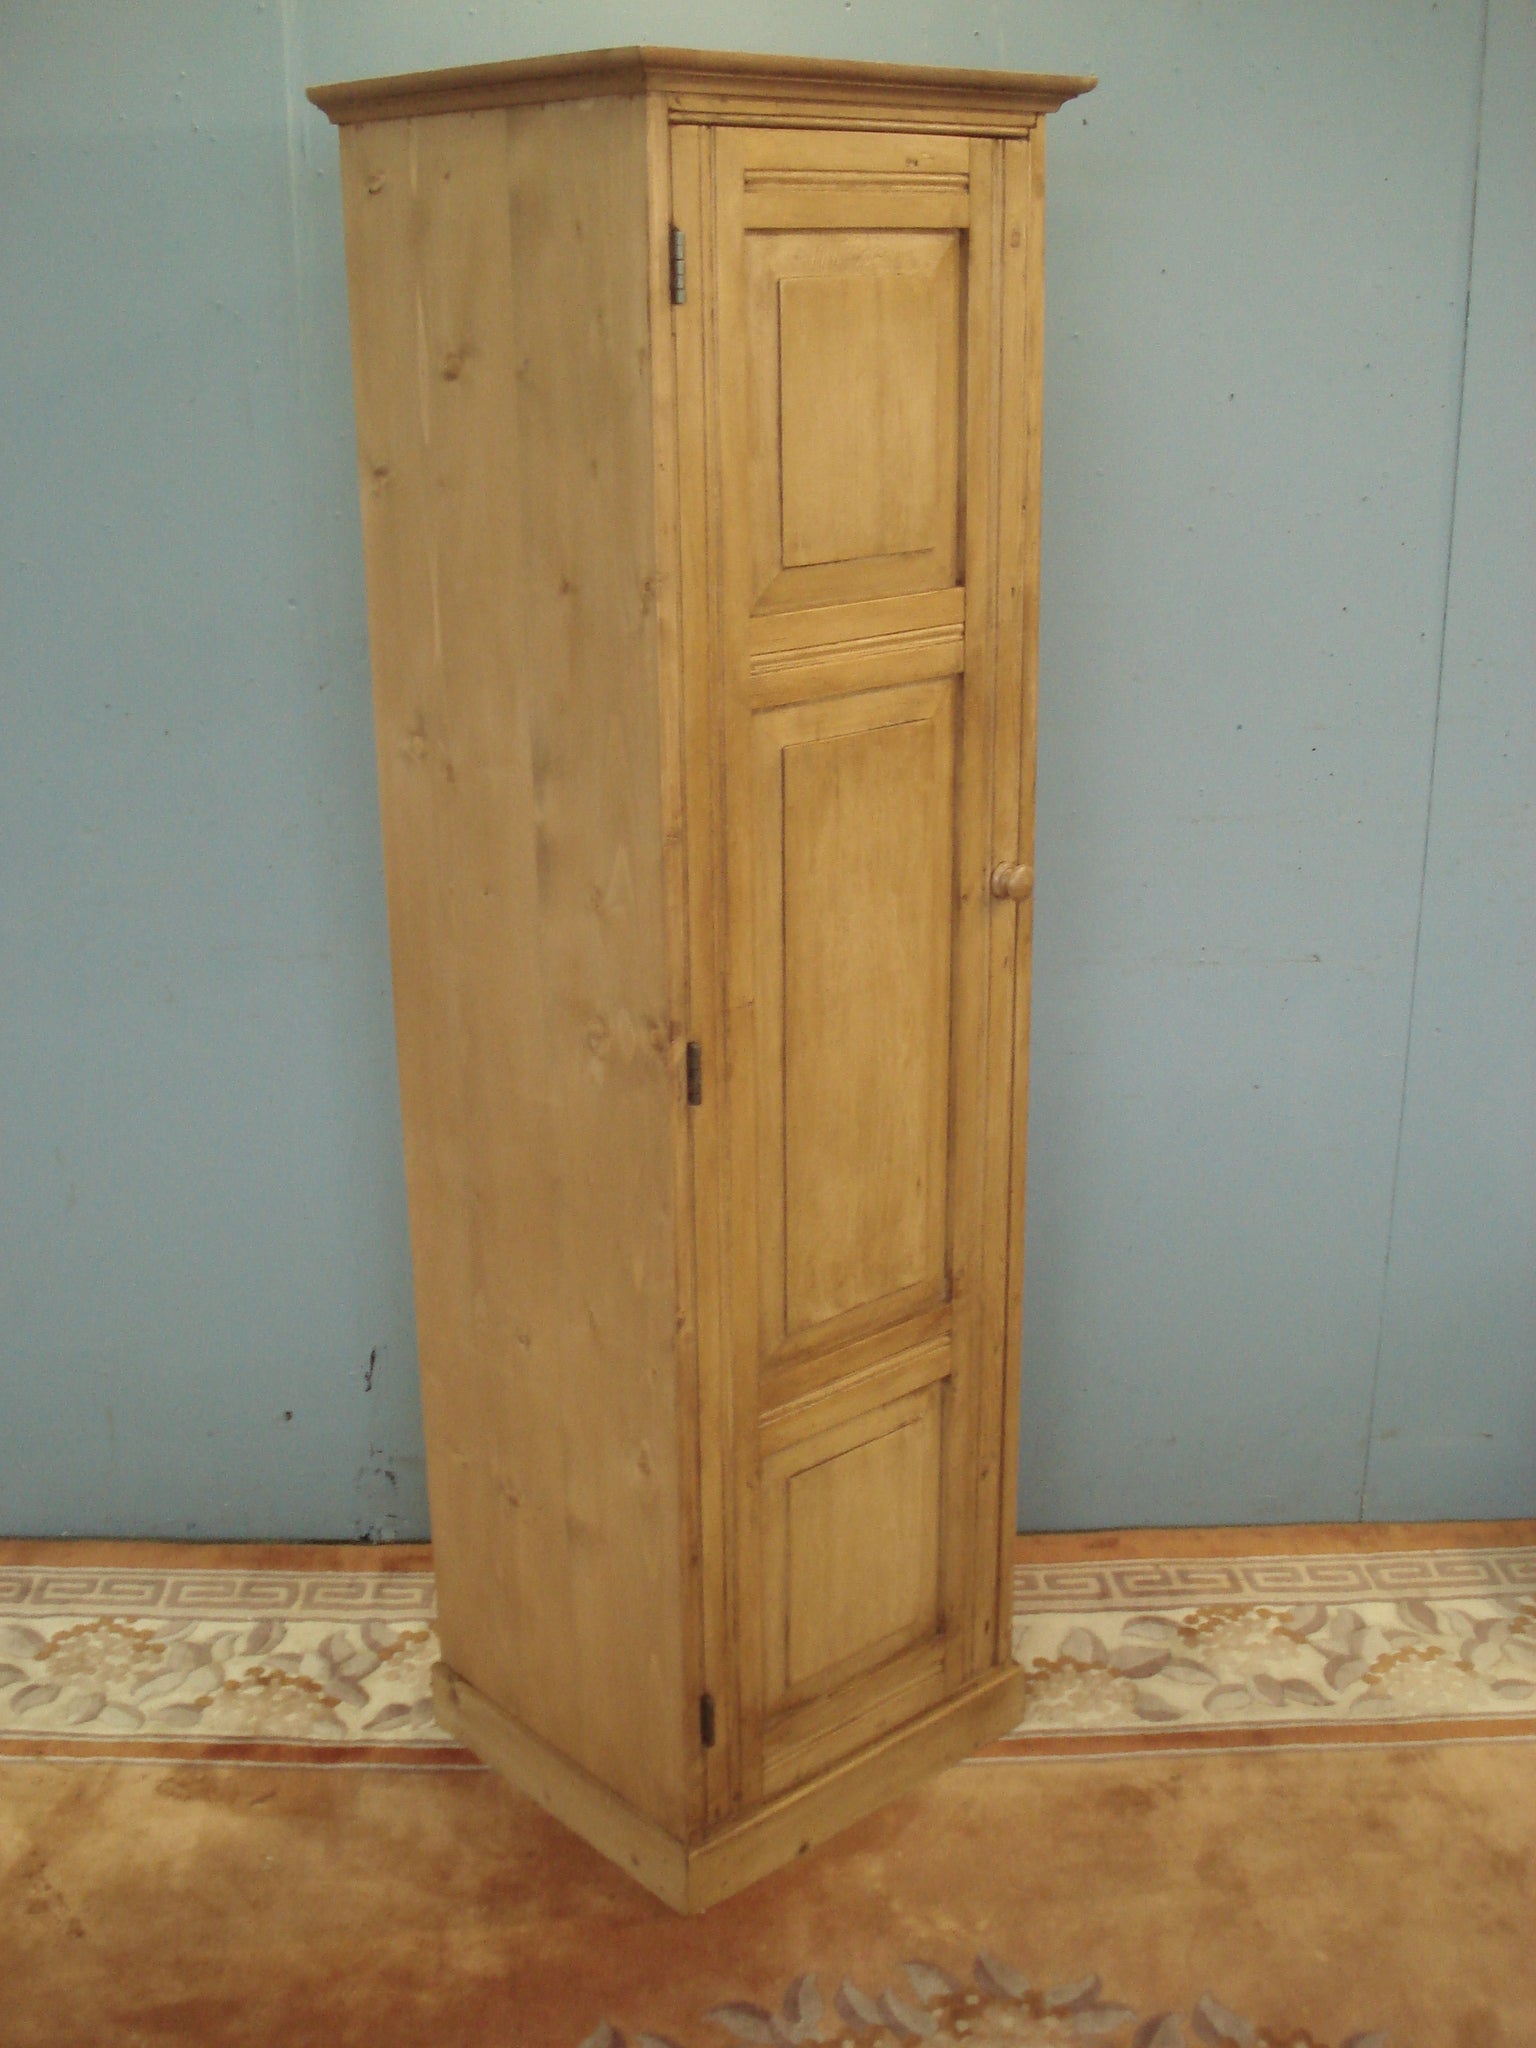 Sentry Box, Small antique pine cupboard. Left hand hung.